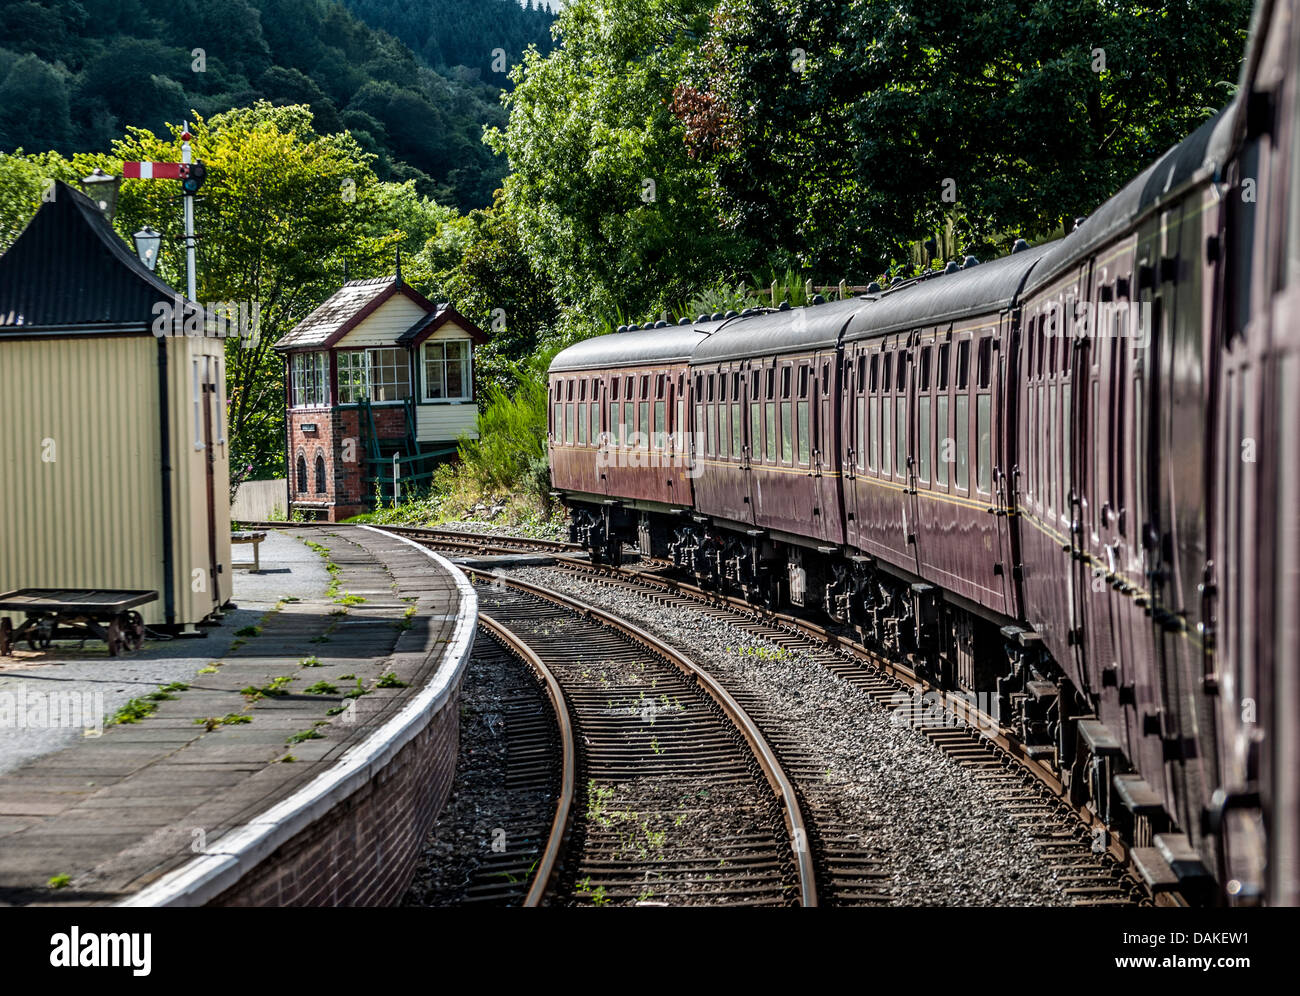 Old train carriages at a station platform with old signal boxes. Stock Photo